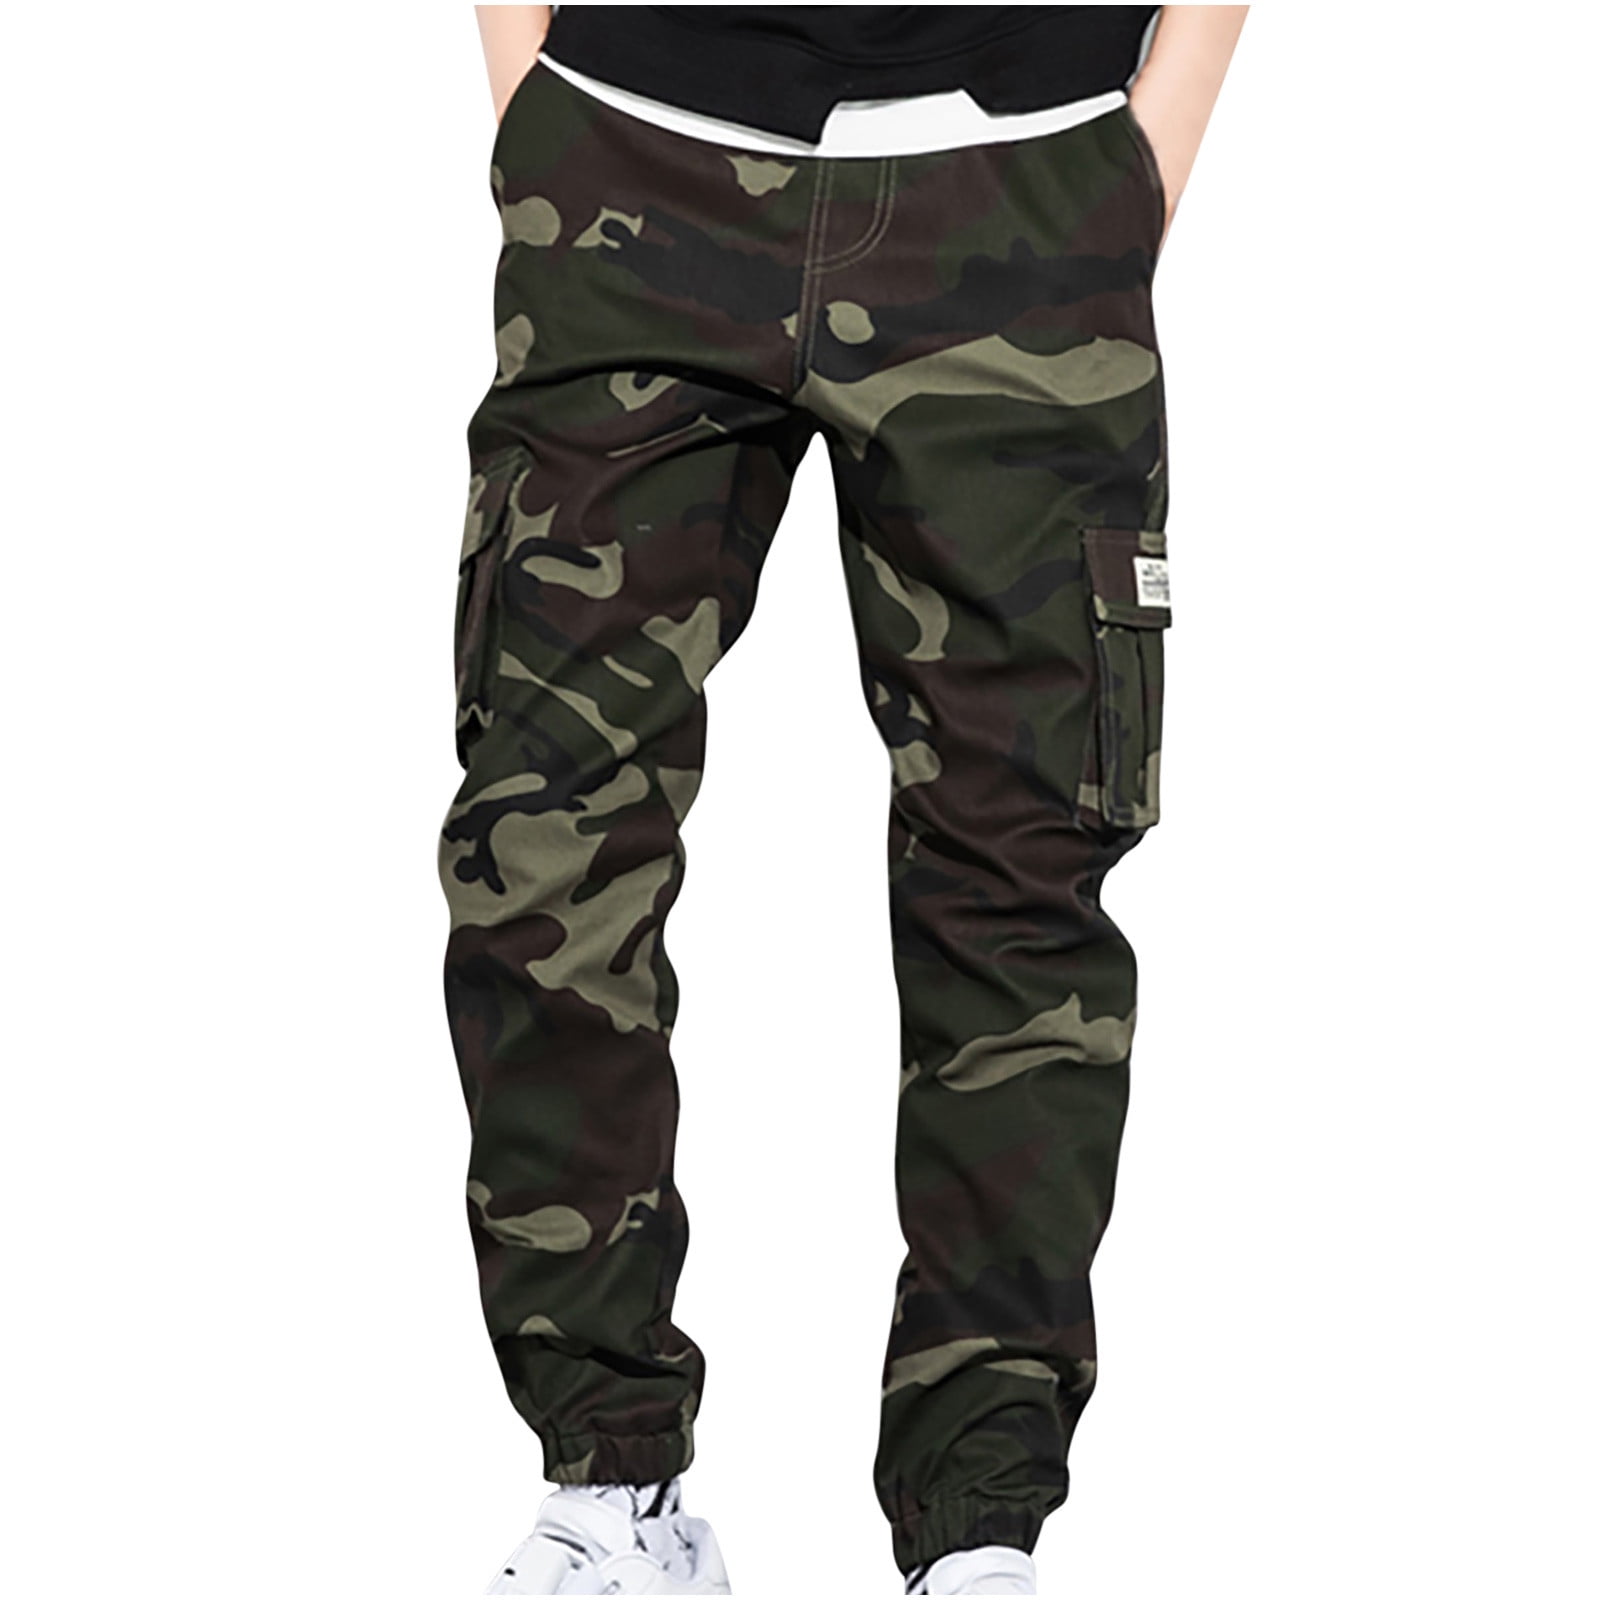 Men's Camo Cargo Pants Casual Outdoor Stretch Tapered Pant Hip Hop